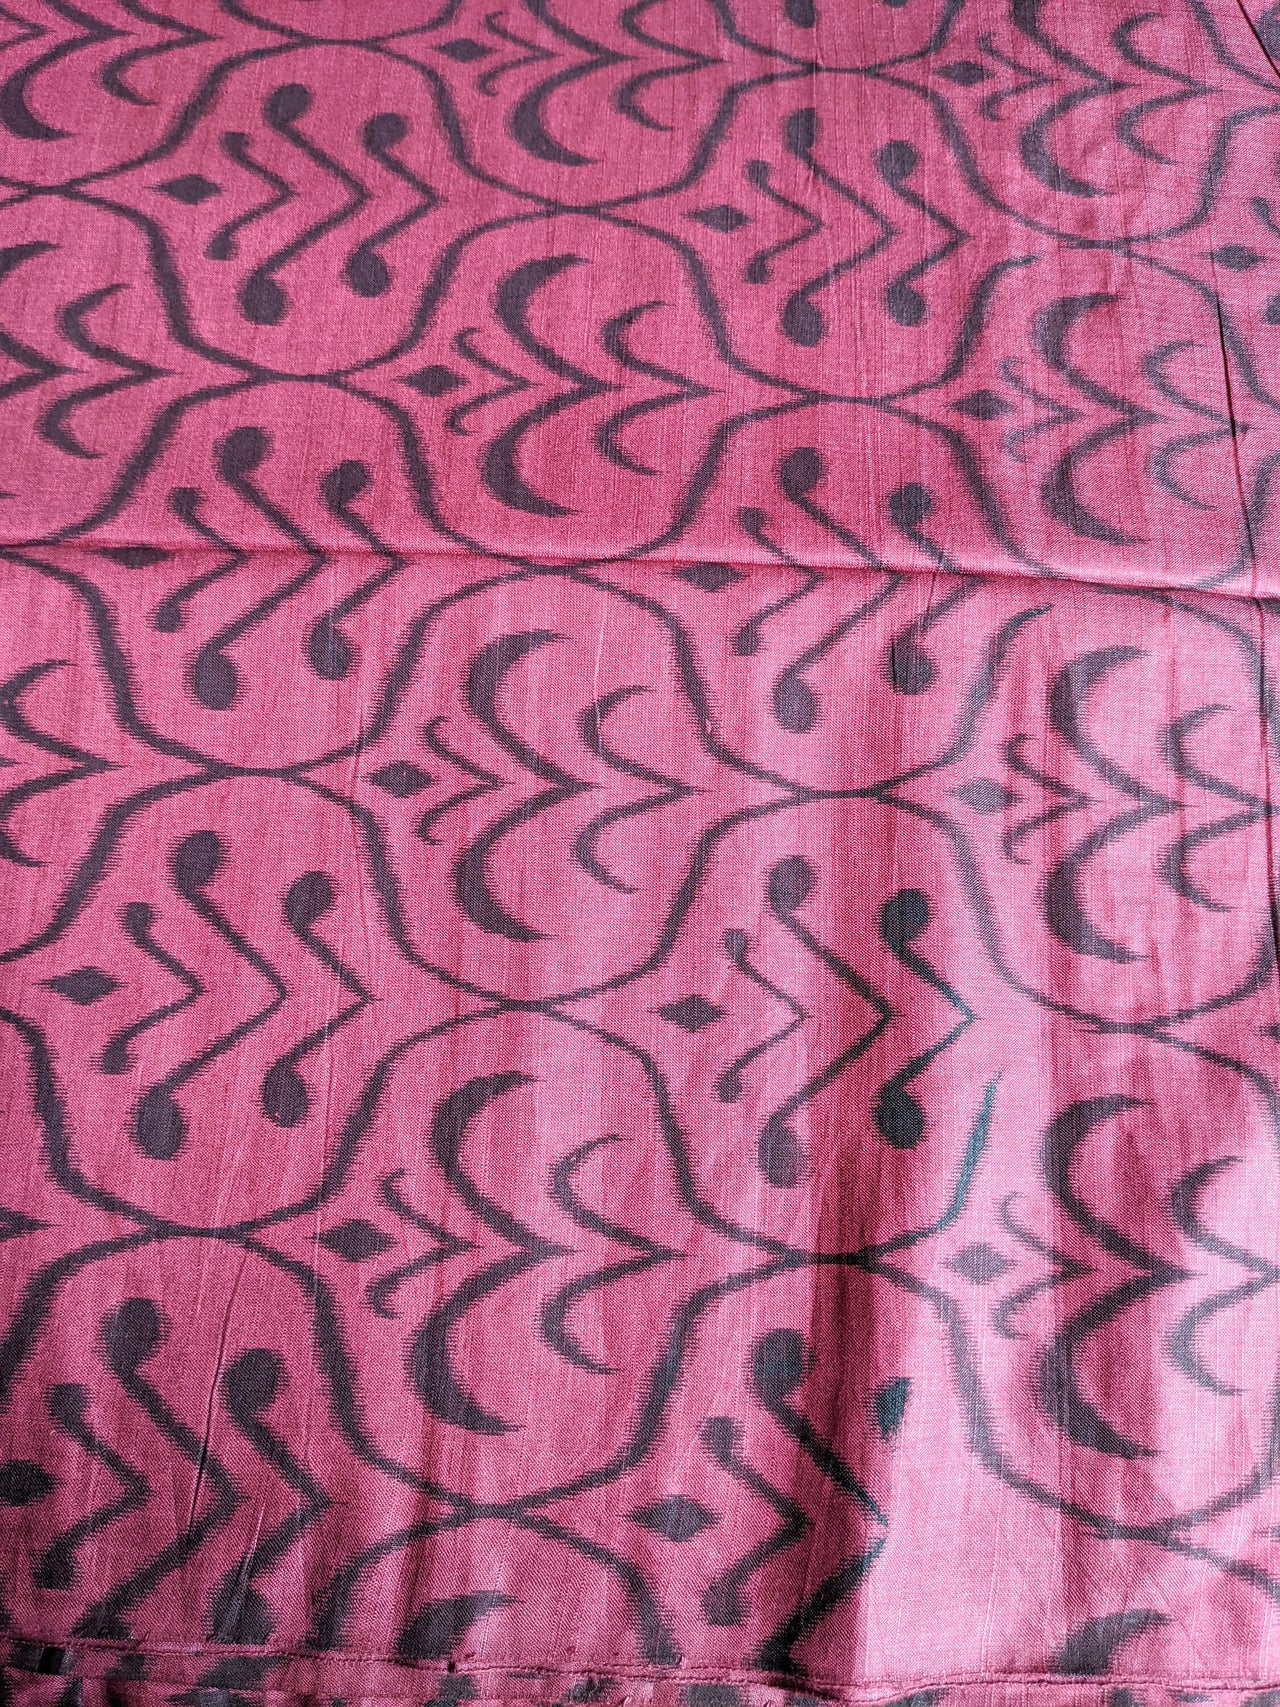 Maroon and Black Printed Cotton Silk Fabric, Festive Fabric, Holiday Fabric